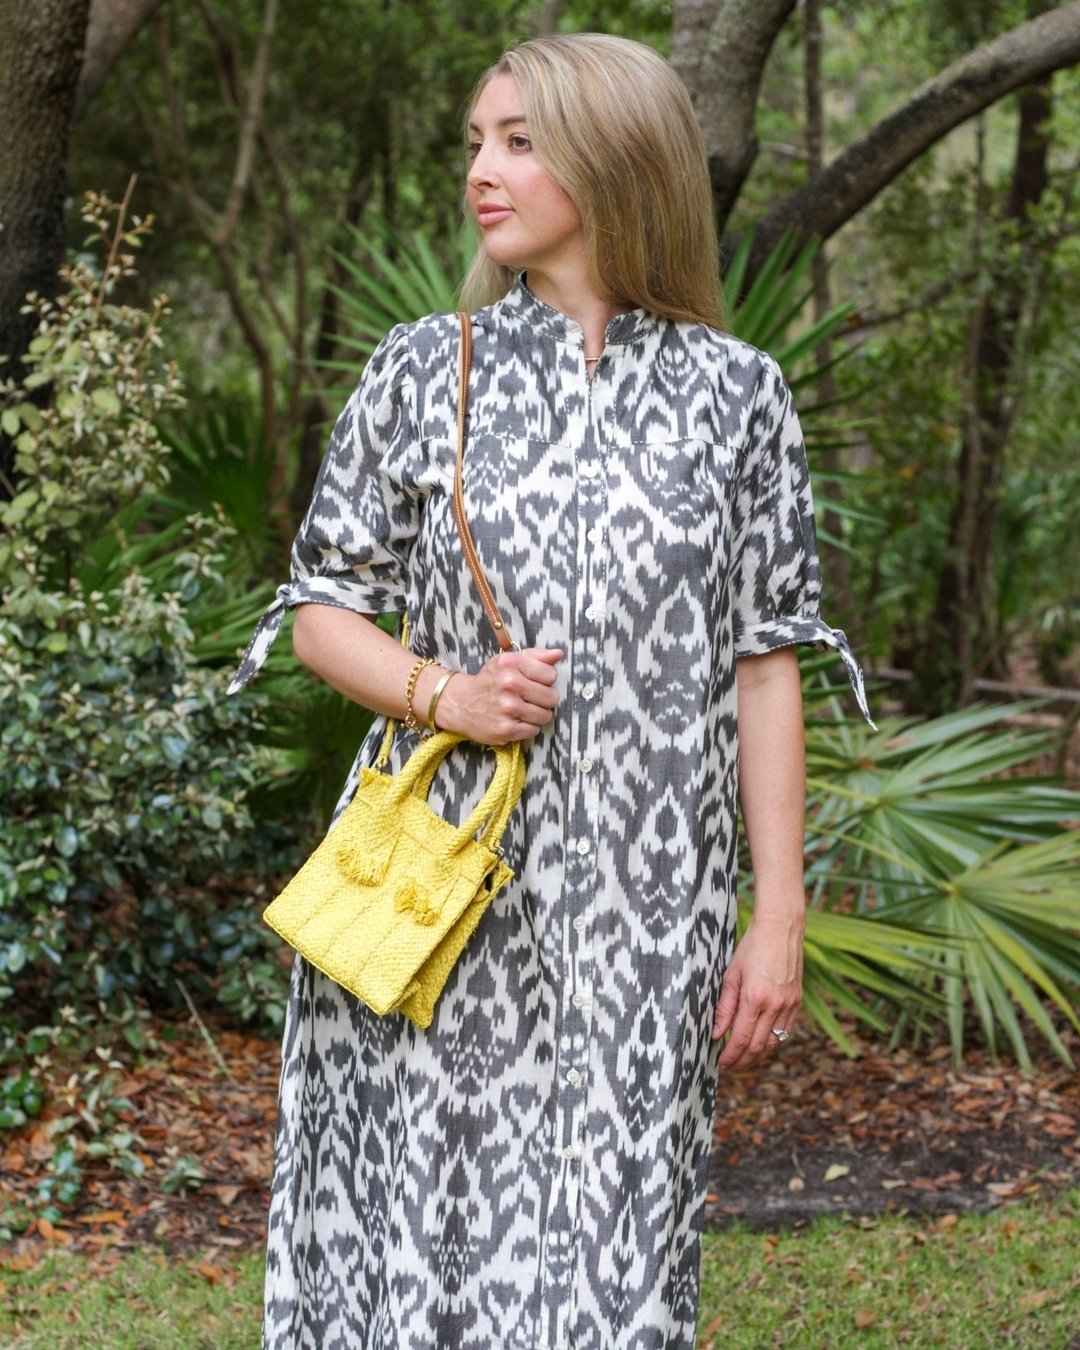 The dress that will take you anywhere! Change your accessories, and this dress changes with your needs!
Our love for ikat will not end, and this handwoven fabric is so special!
We specialize in clothing you can wear every day, made with unique detail